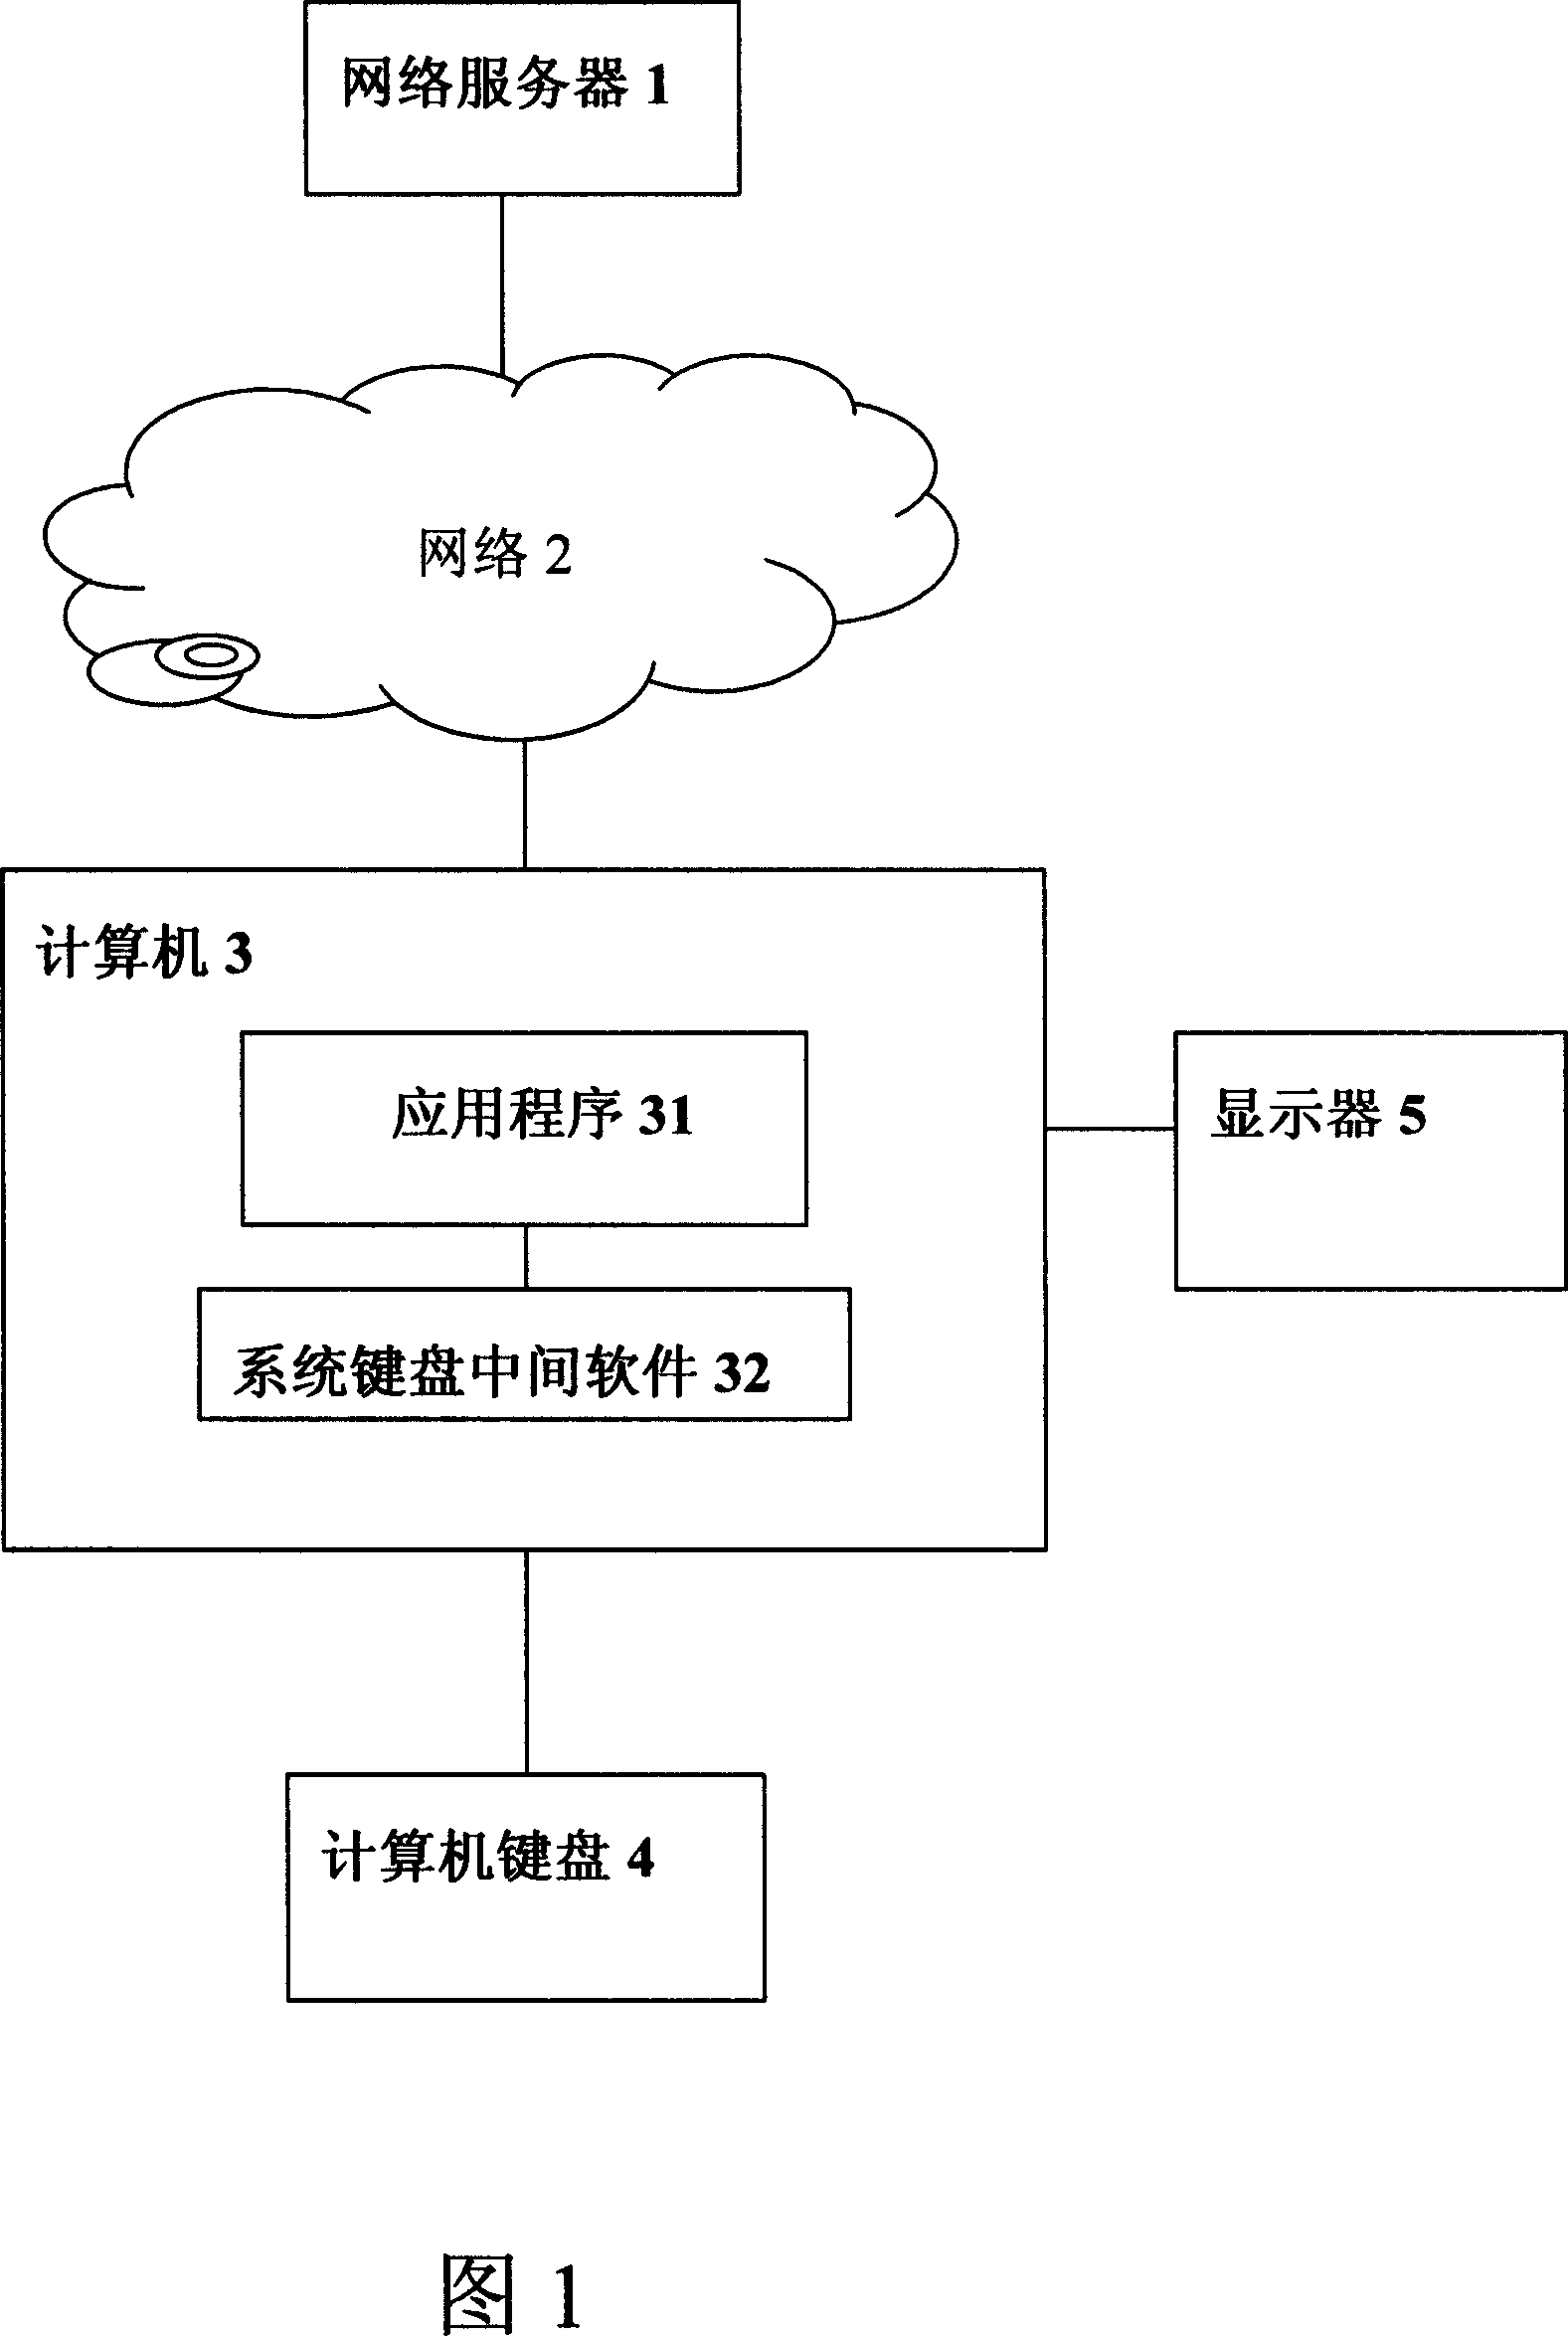 A device and method for secure use of network server service not depending on operating system security